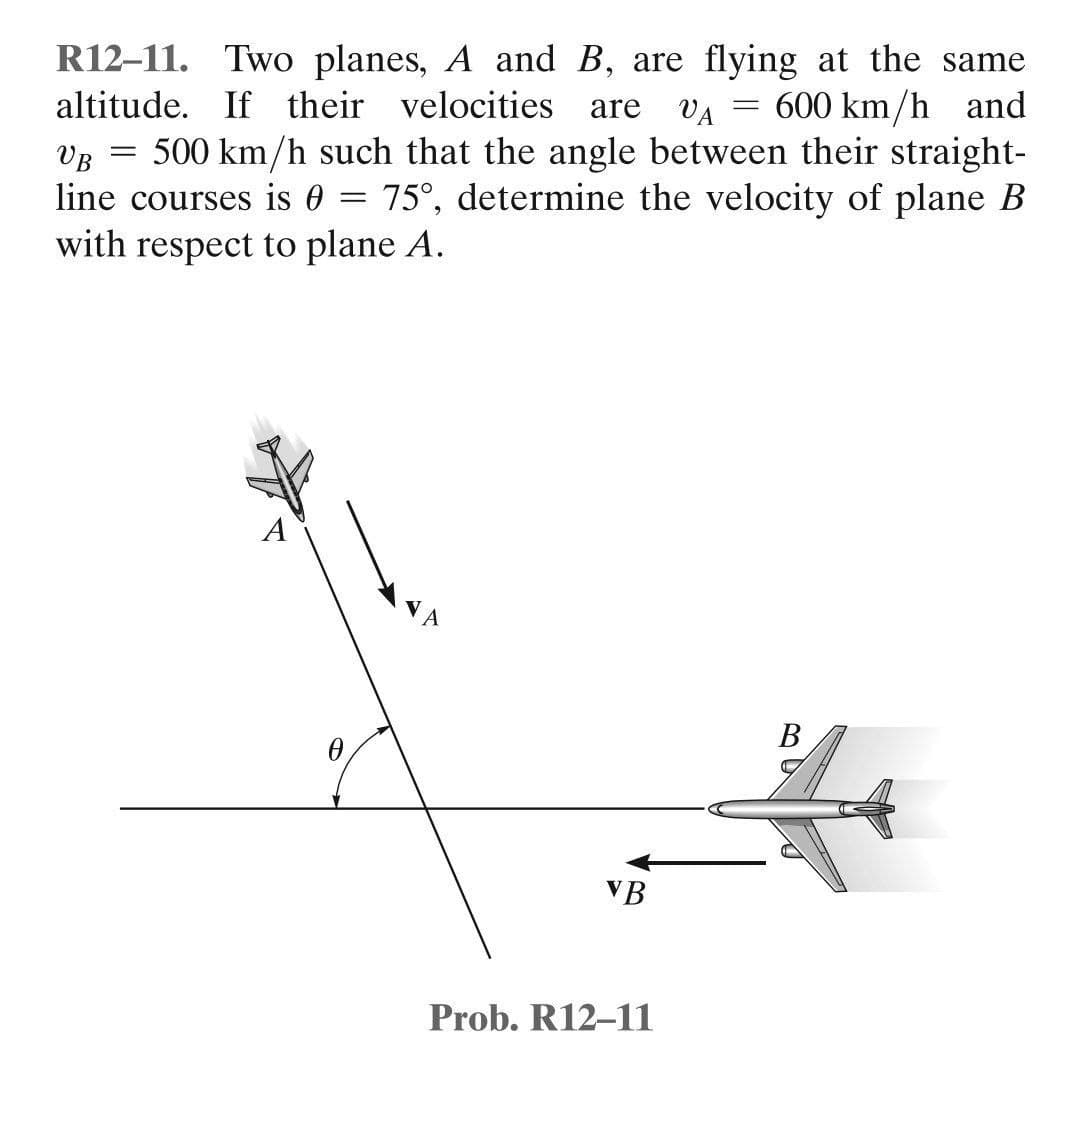 R12-11. Two planes, A and B, are flying at the same
altitude. If their velocities are
VA
600 km/h and
=
VB 500 km/h such that the angle between their straight-
75°, determine the velocity of plane B
=
line courses is 0
with respect to plane A.
A
B
VB
Prob. R12-11